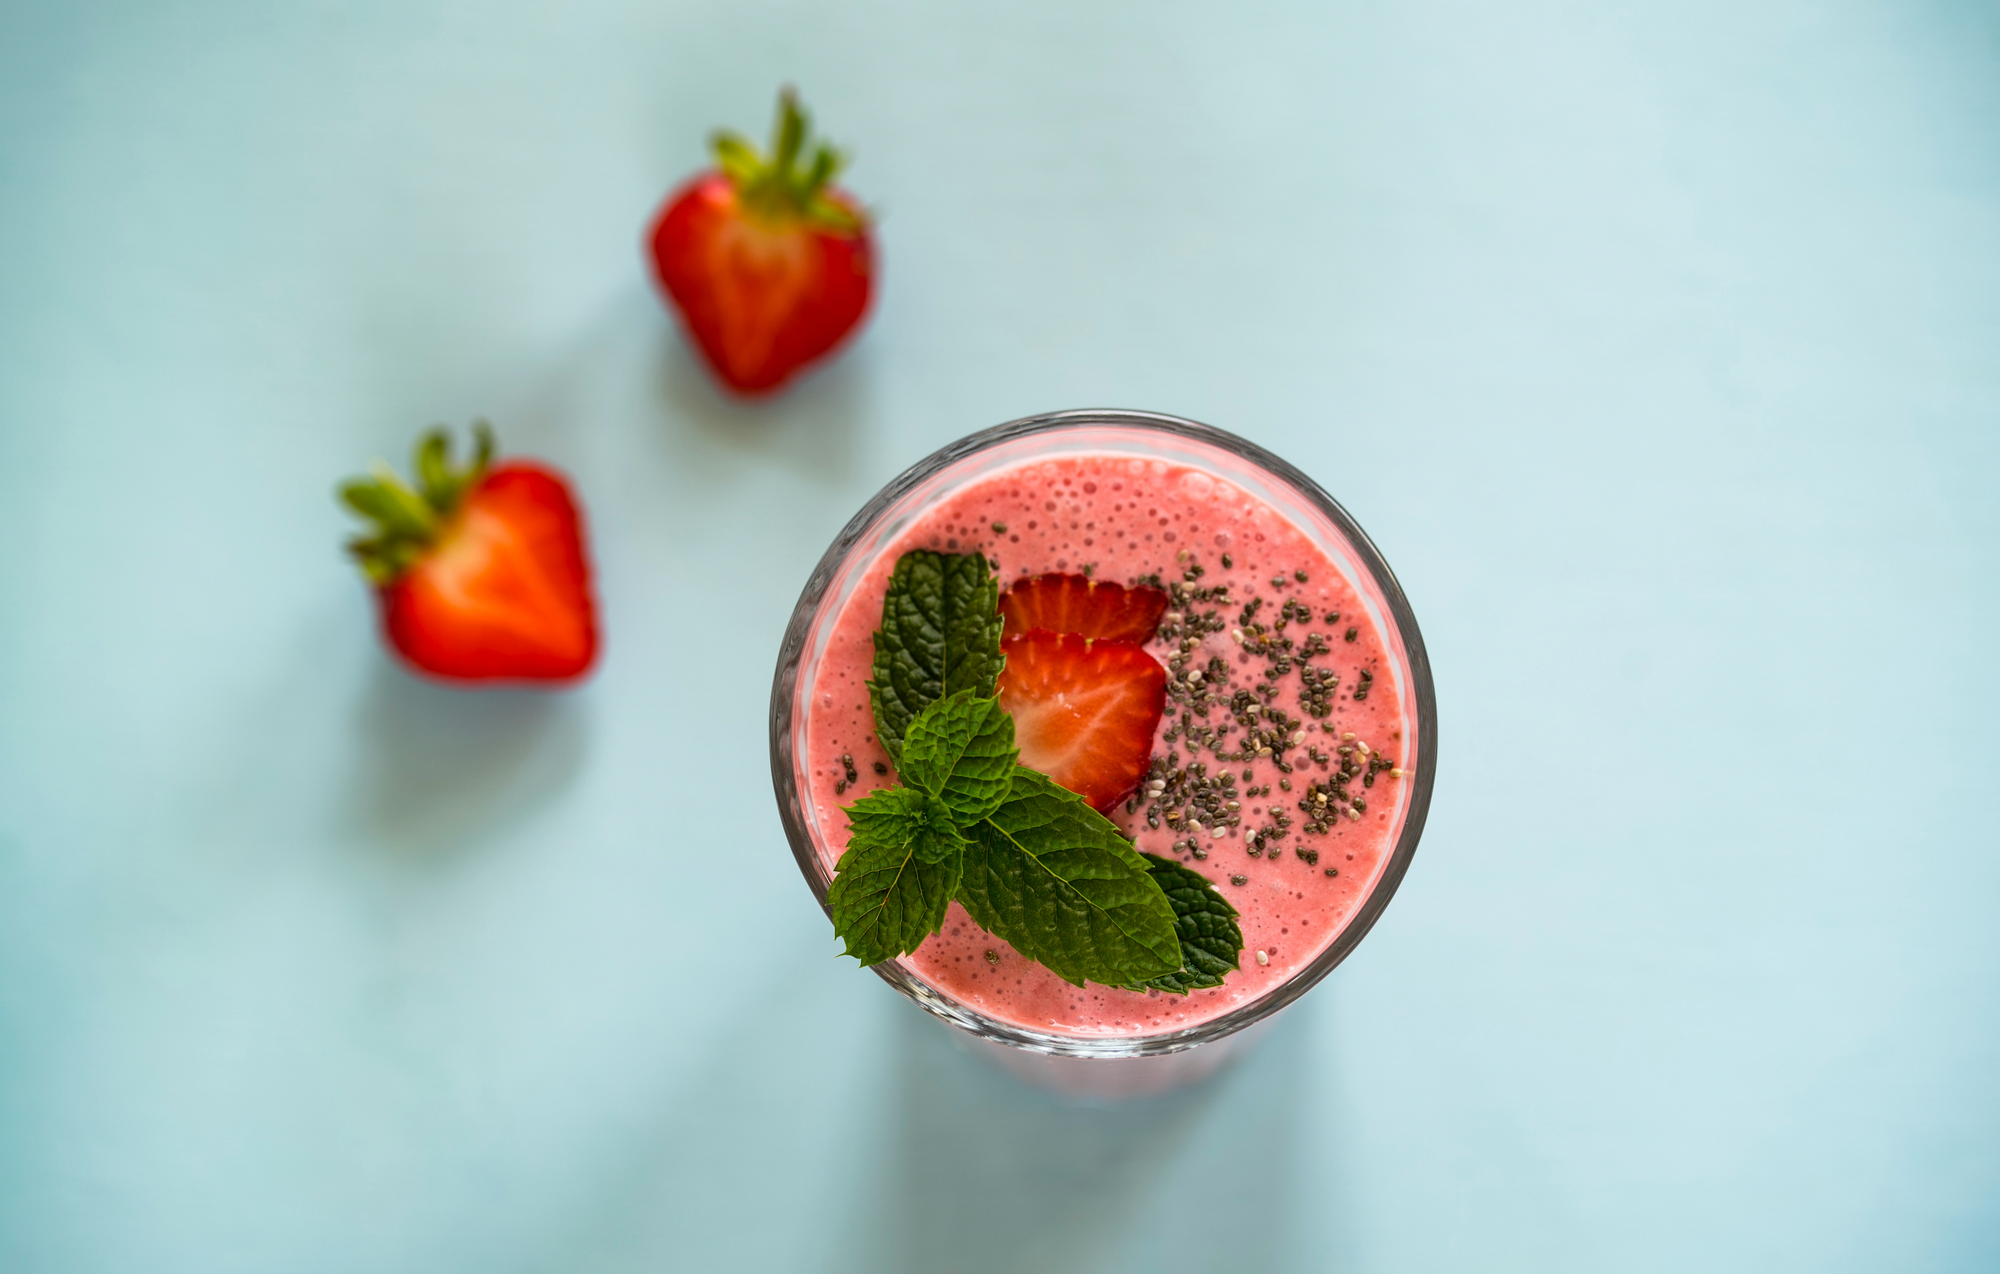 Are smoothies bad for your teeth?